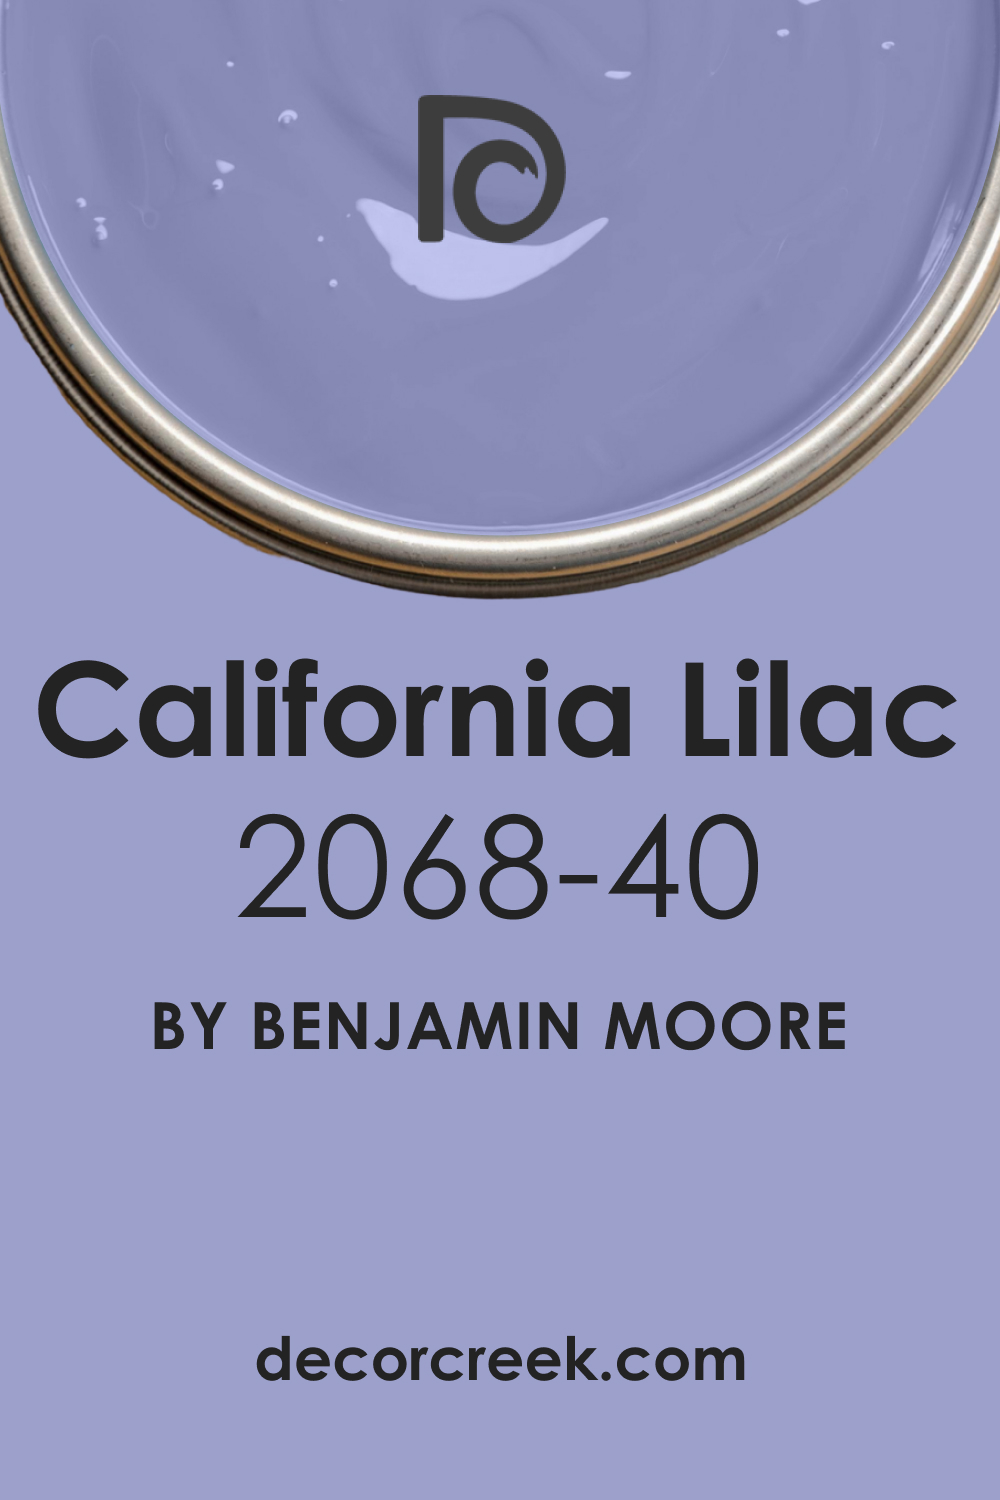 What Color Is California Lilac 2068-40?